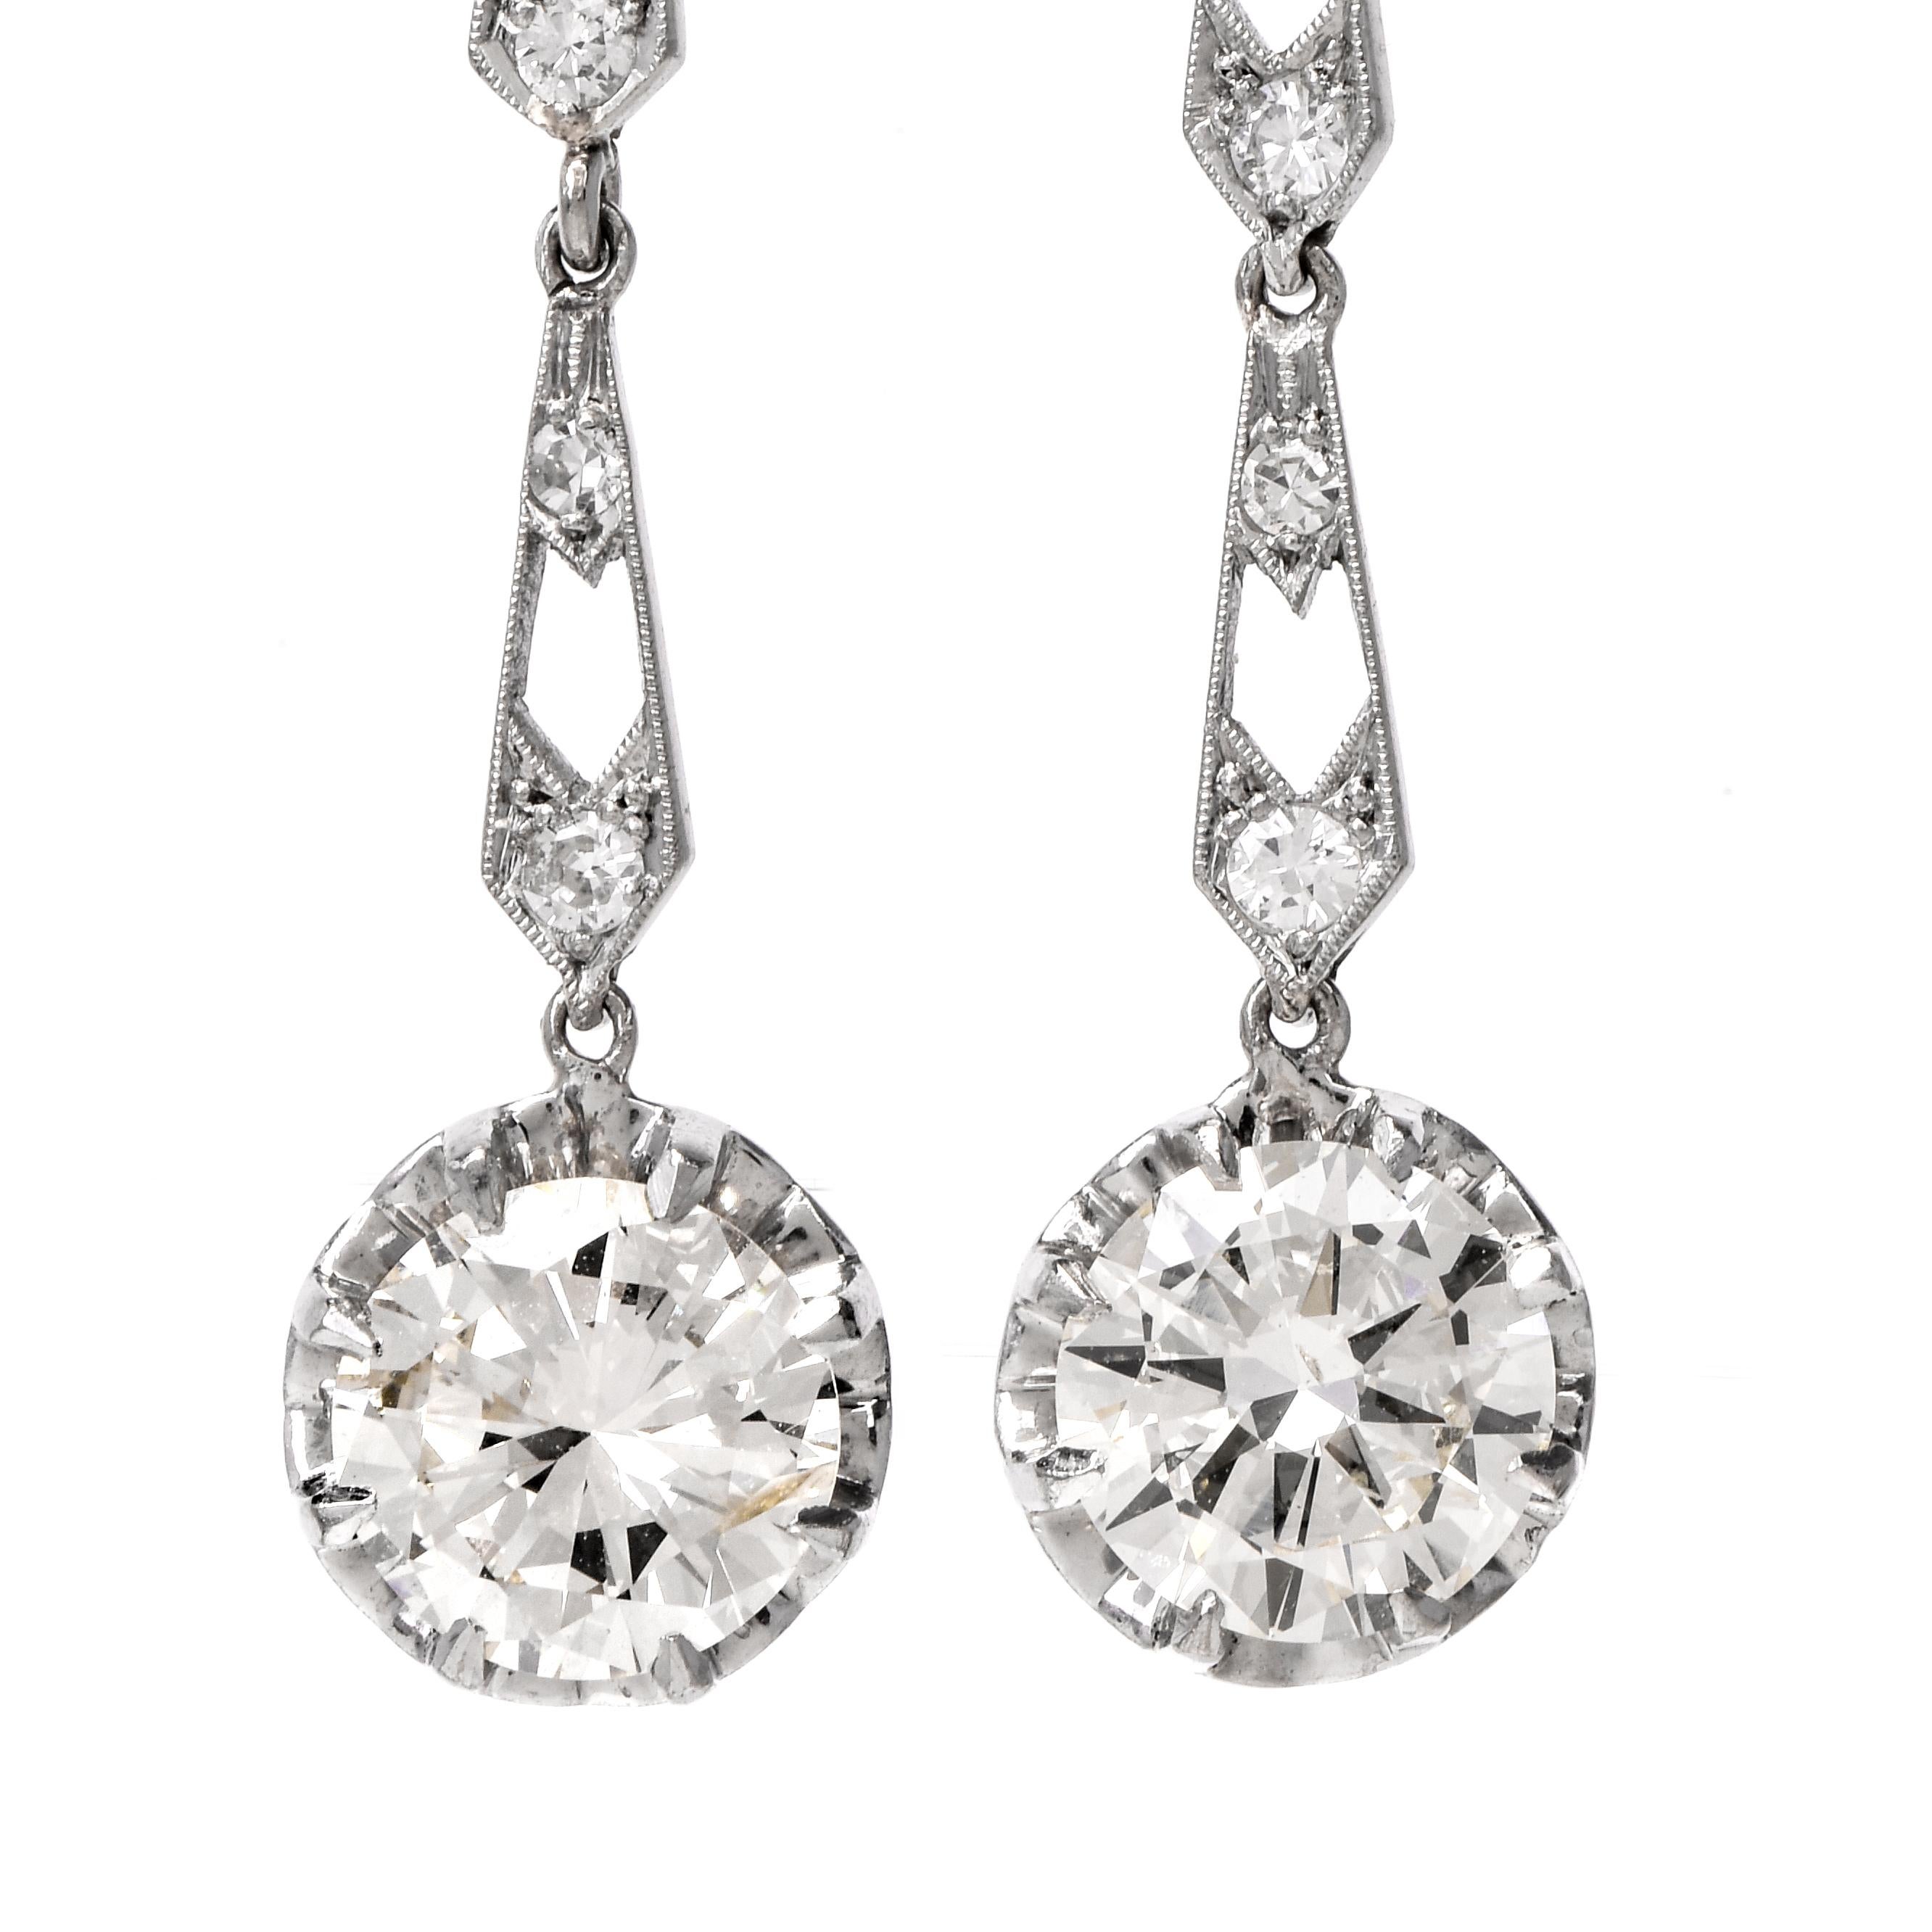 These stunning vintage diamond dangle drop earrings are crafted in solid platinum, weighing 6 grams and measuring 1 1/2” long x 10mm wide. Drops are prong-set with a pair of round-cut diamonds, weighing approximately, 3.95 carats in total, graded J